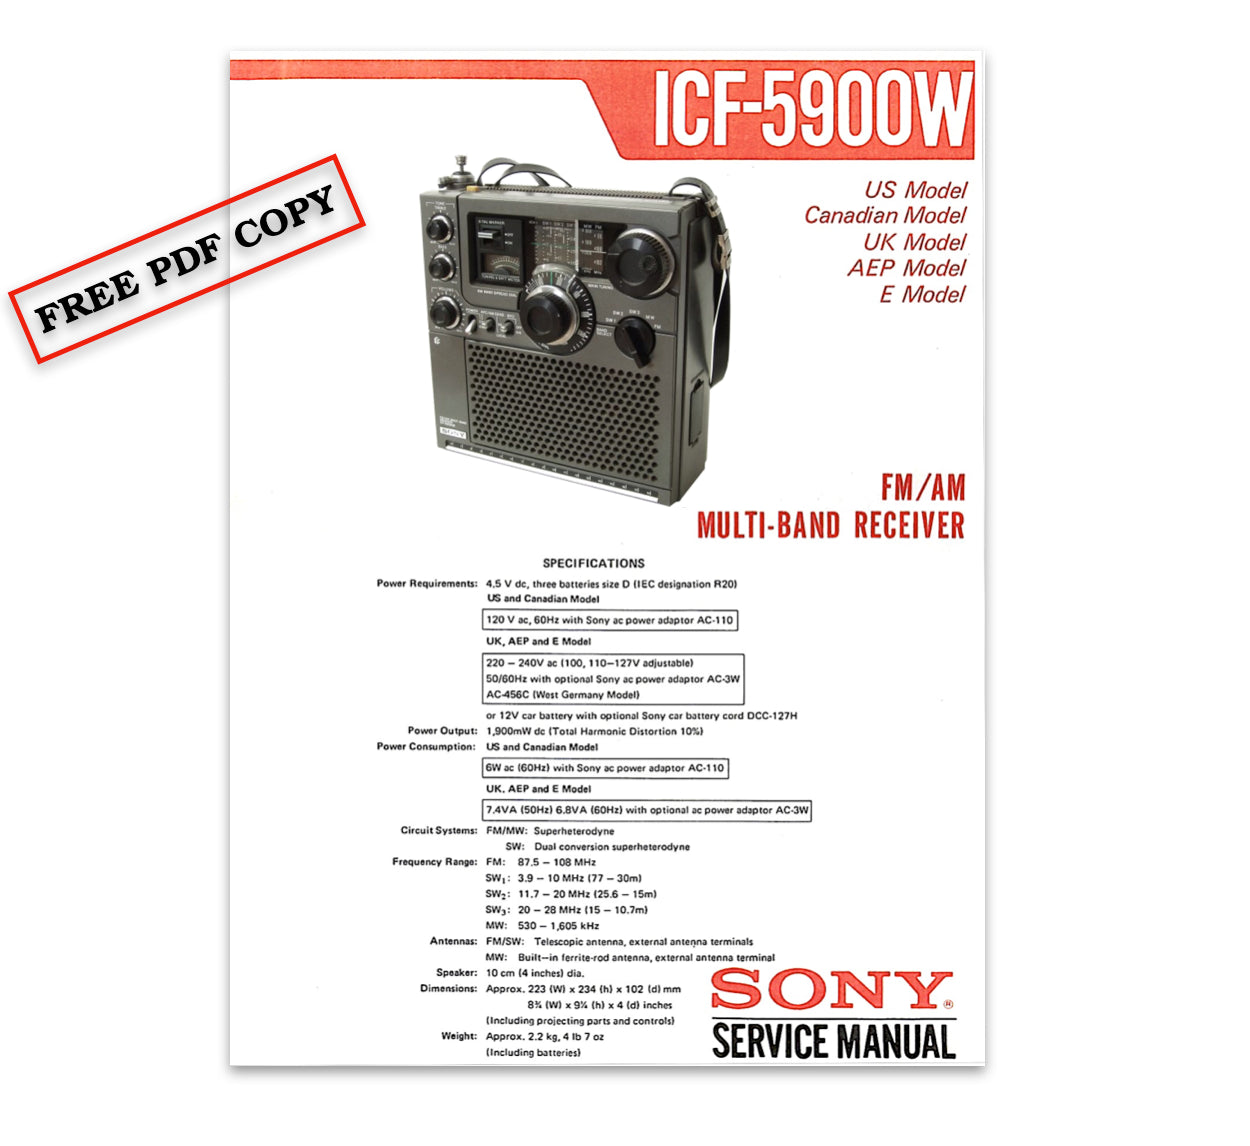 Sony ICF-5900W Service Manual (Free Download)